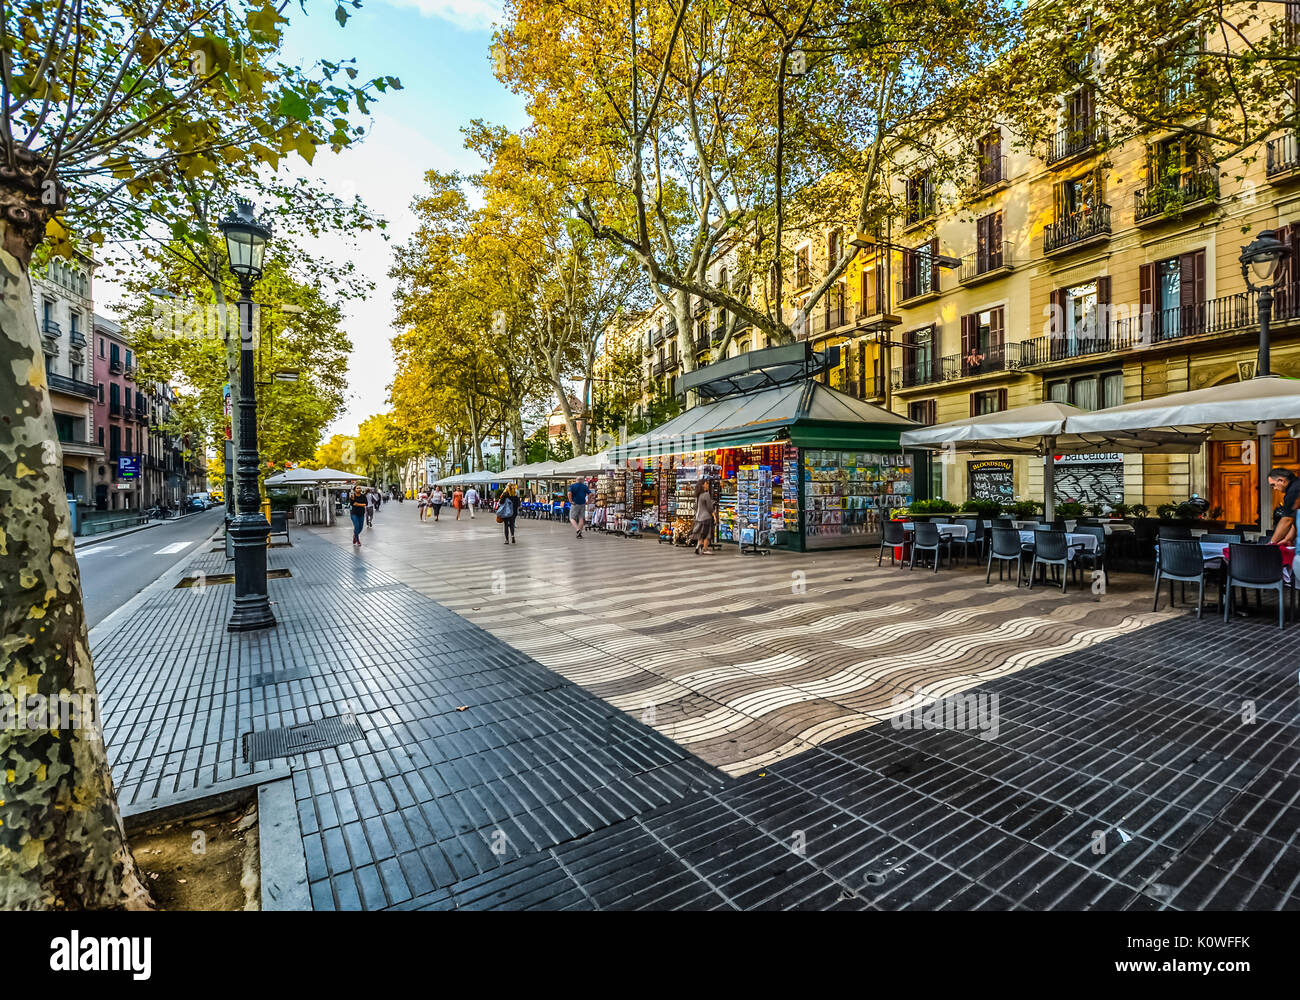 Morning on La Rambla in Barcelona Spain before the tourists arrive as a cafe gets ready for business and a woman buys souvenirs from a stand Stock Photo